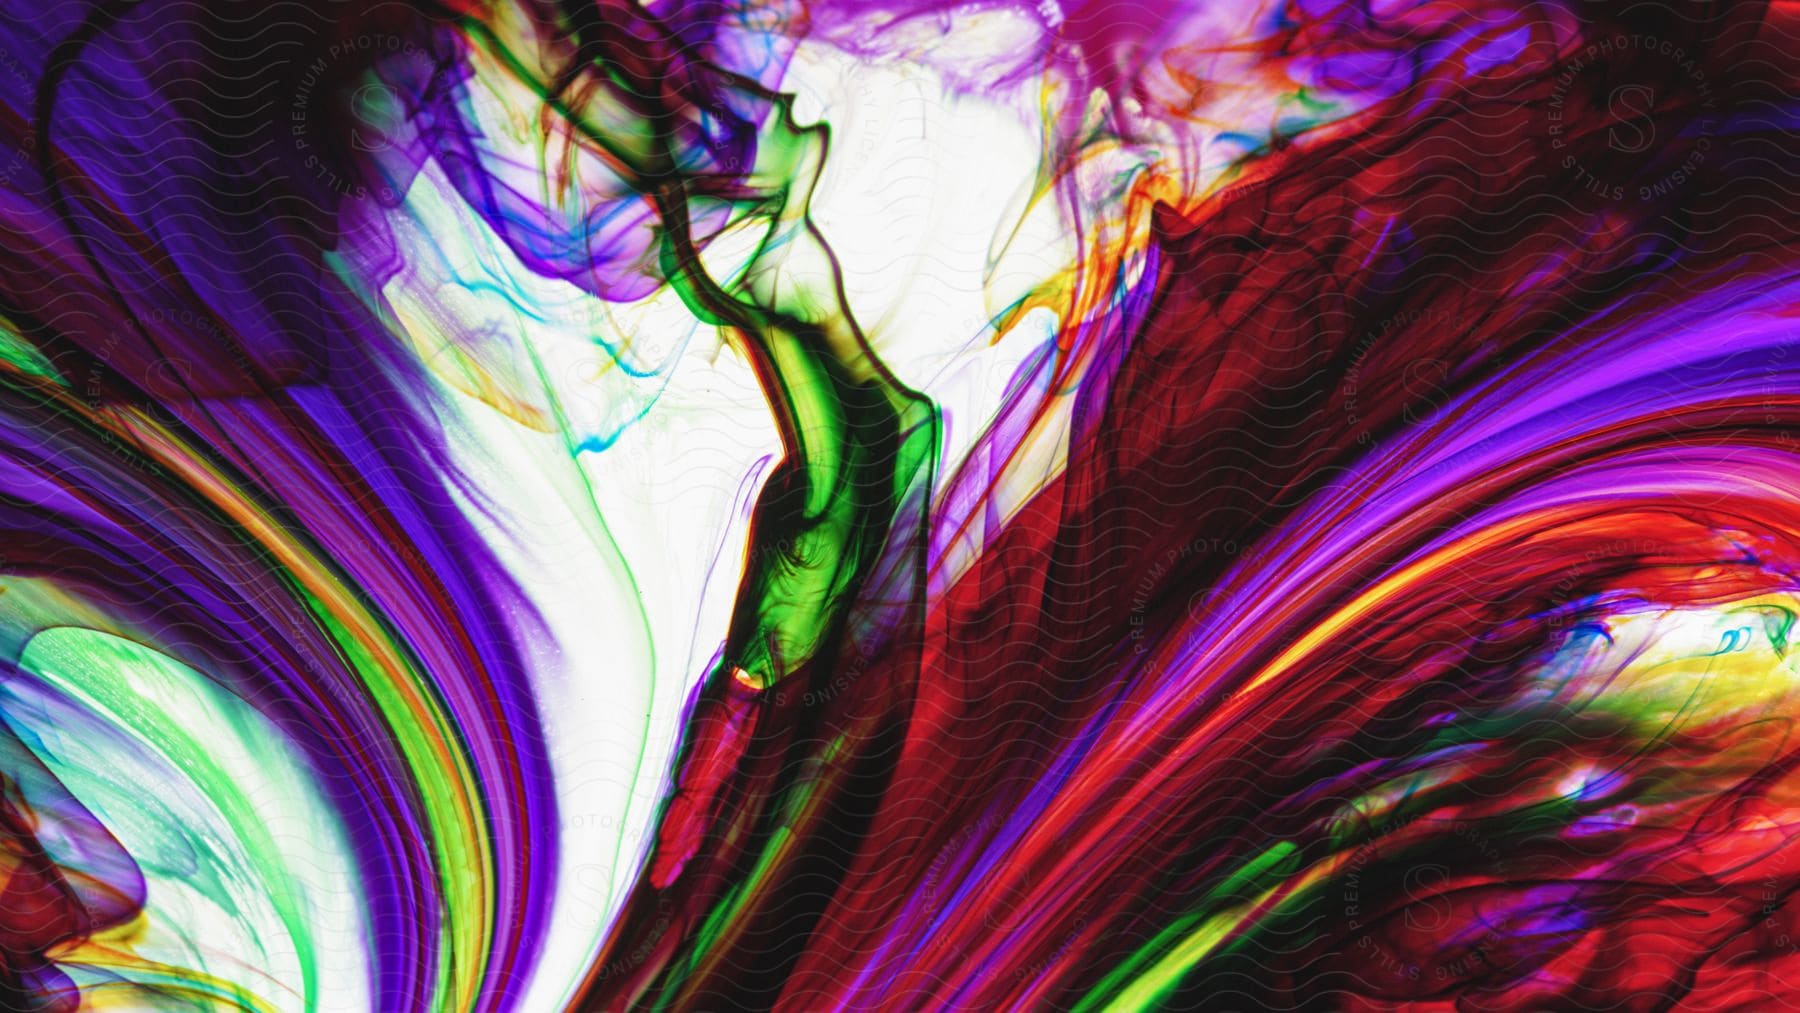 An abstract piece of art with varies bright colors making a liquid effect.